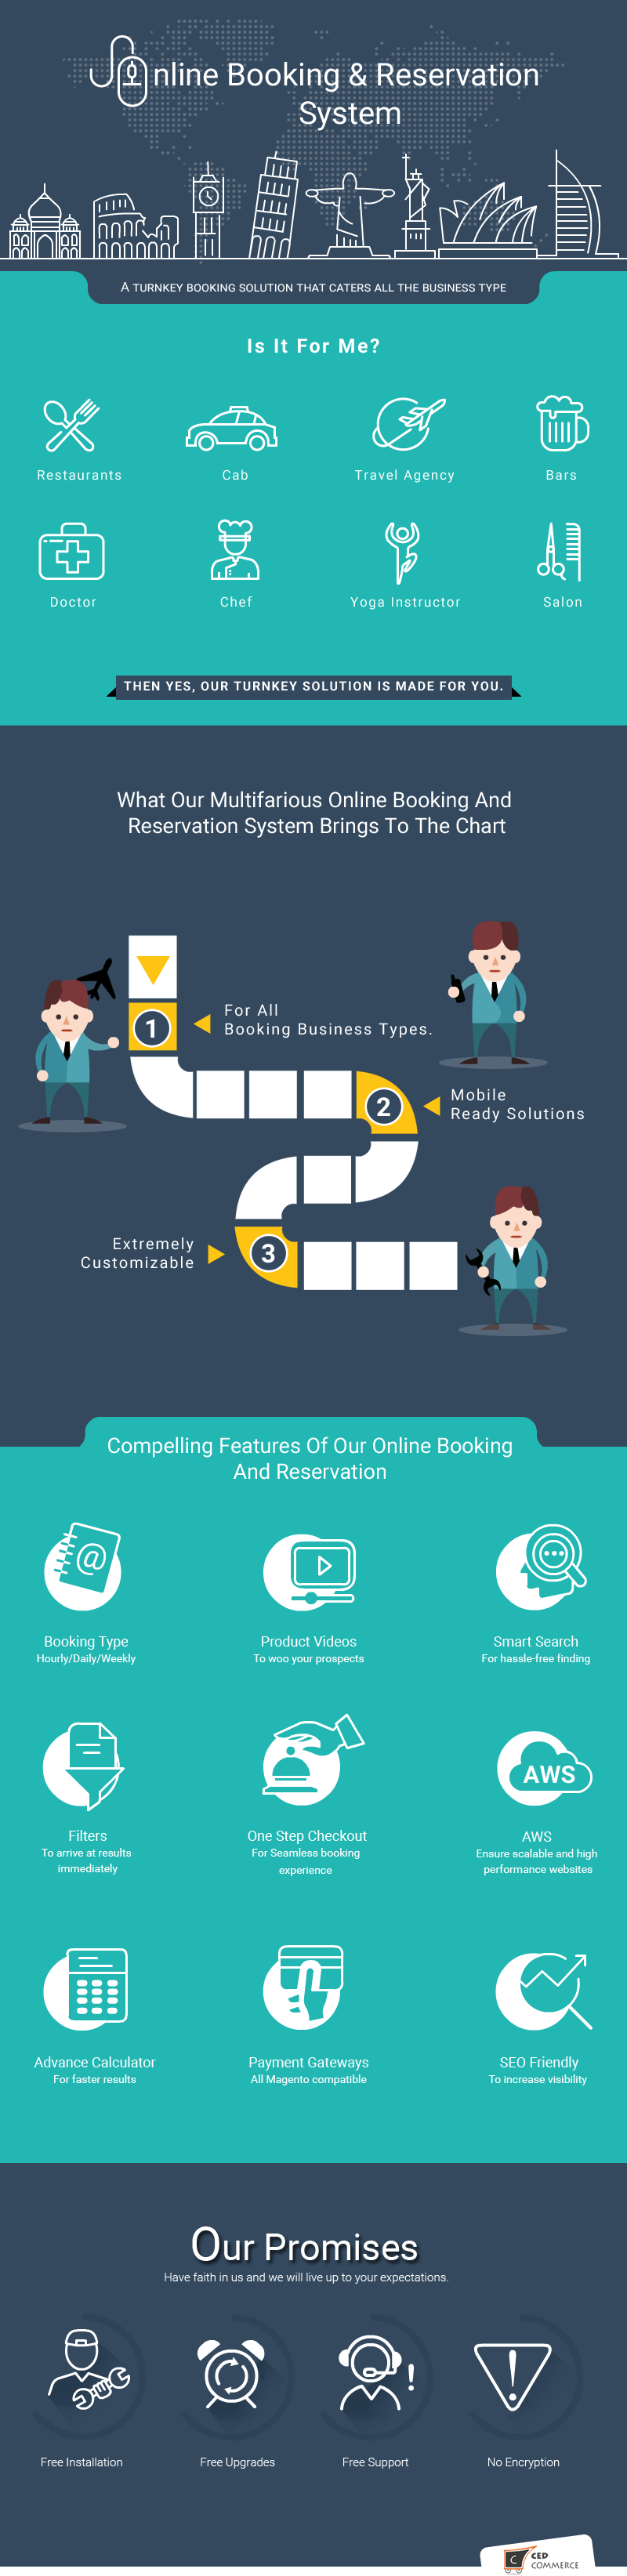 Online Booking and Reservation System